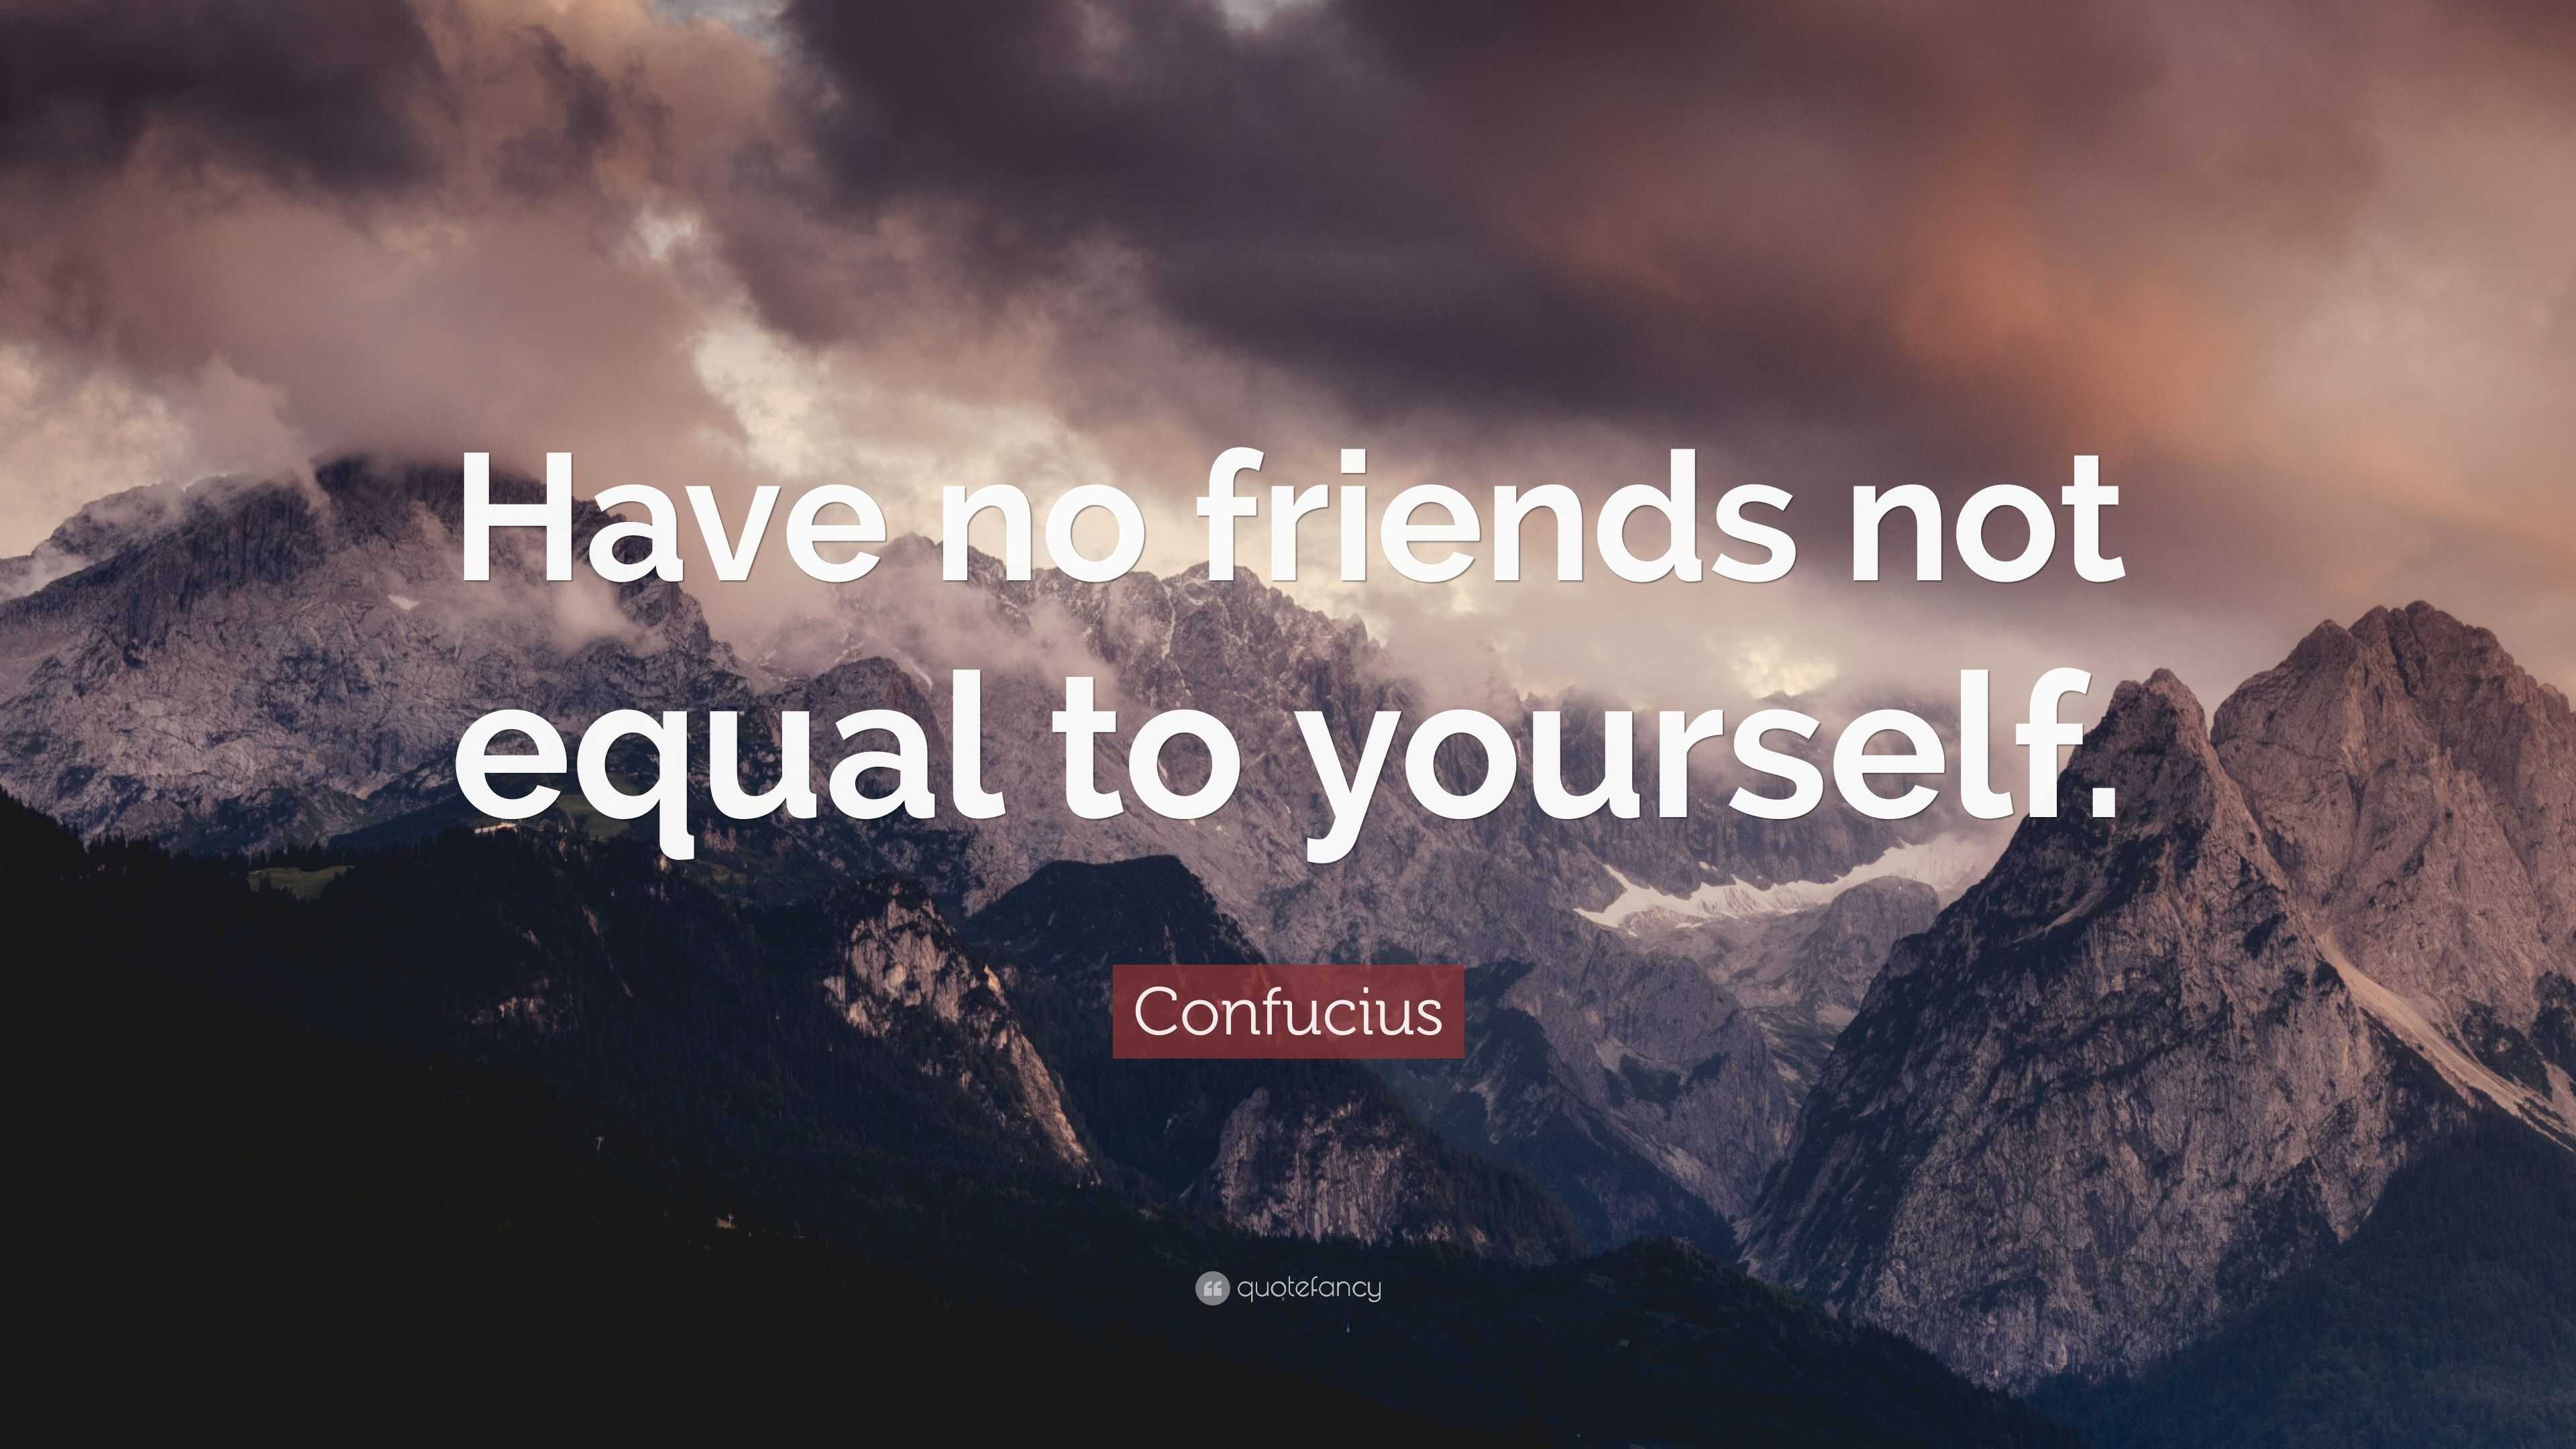 Confucius Quote: “Have no friends not equal to yourself.” (12